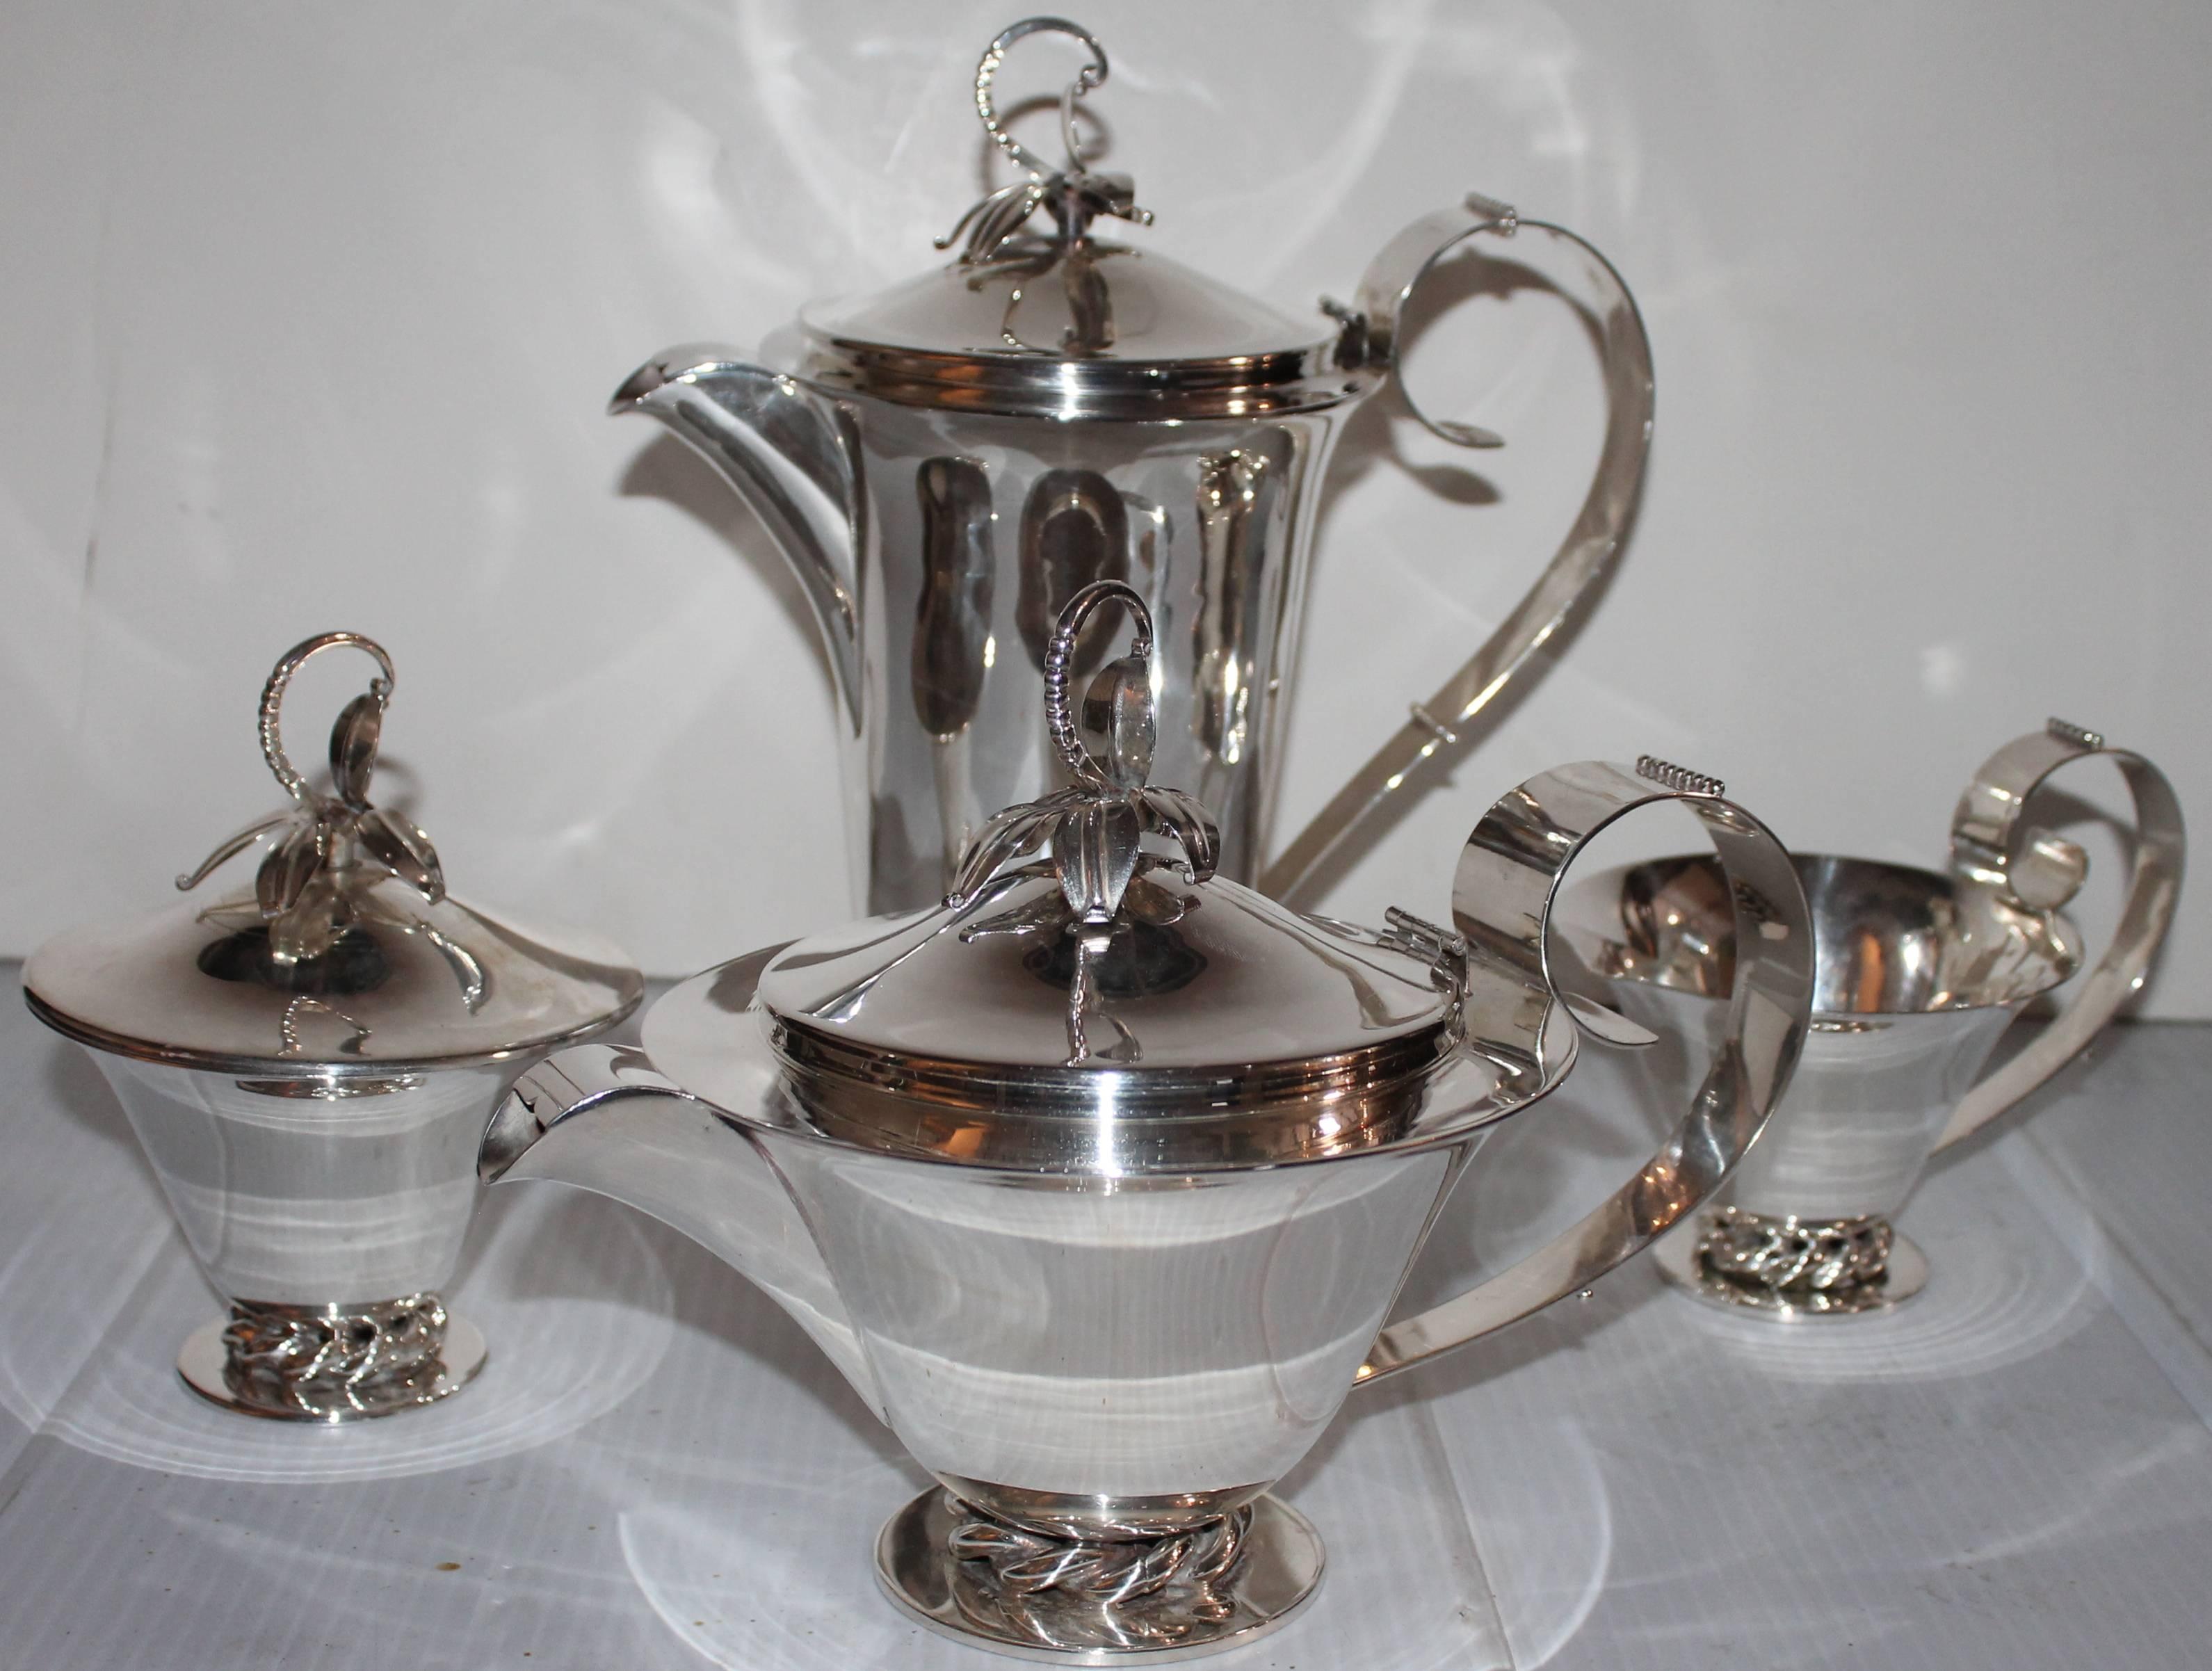 Three Crowns silver plate tea set. Coffee pot, sugar and creamer and cup.
Marked with Three Crowns, Royal Hickman. 
Measures: Creamer 7 x 7 x 10.
Sugar 6 x 5.
Cup 7 x 5.
 